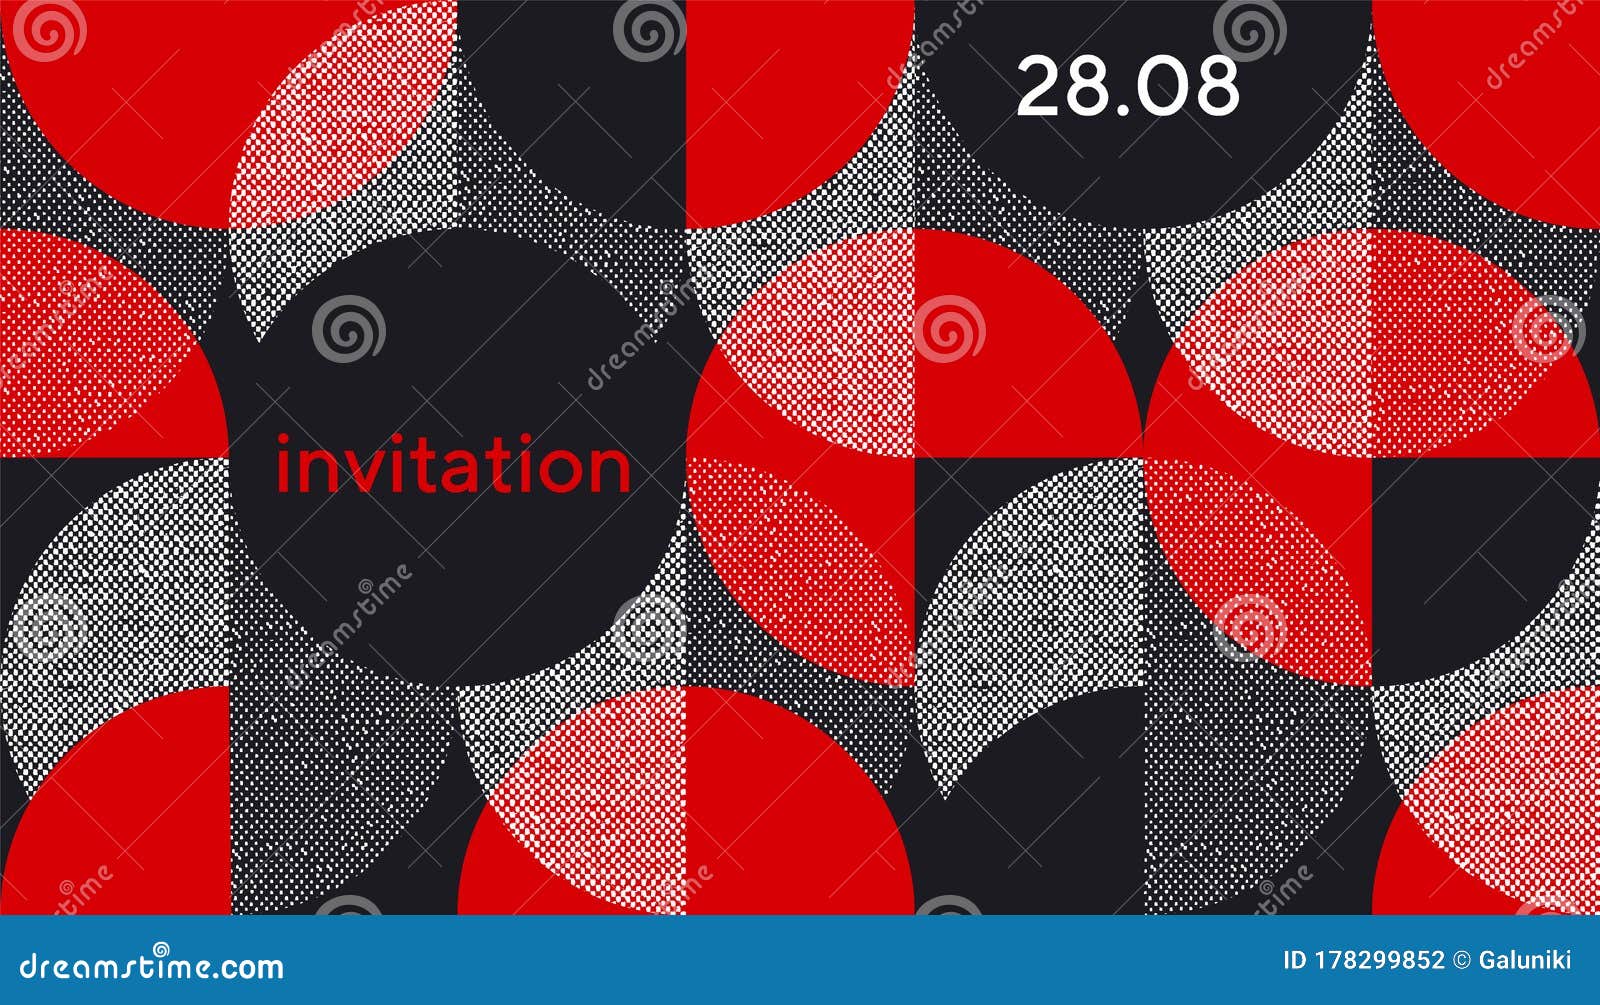 creative geometrical abstract pattern for card, header, invitation